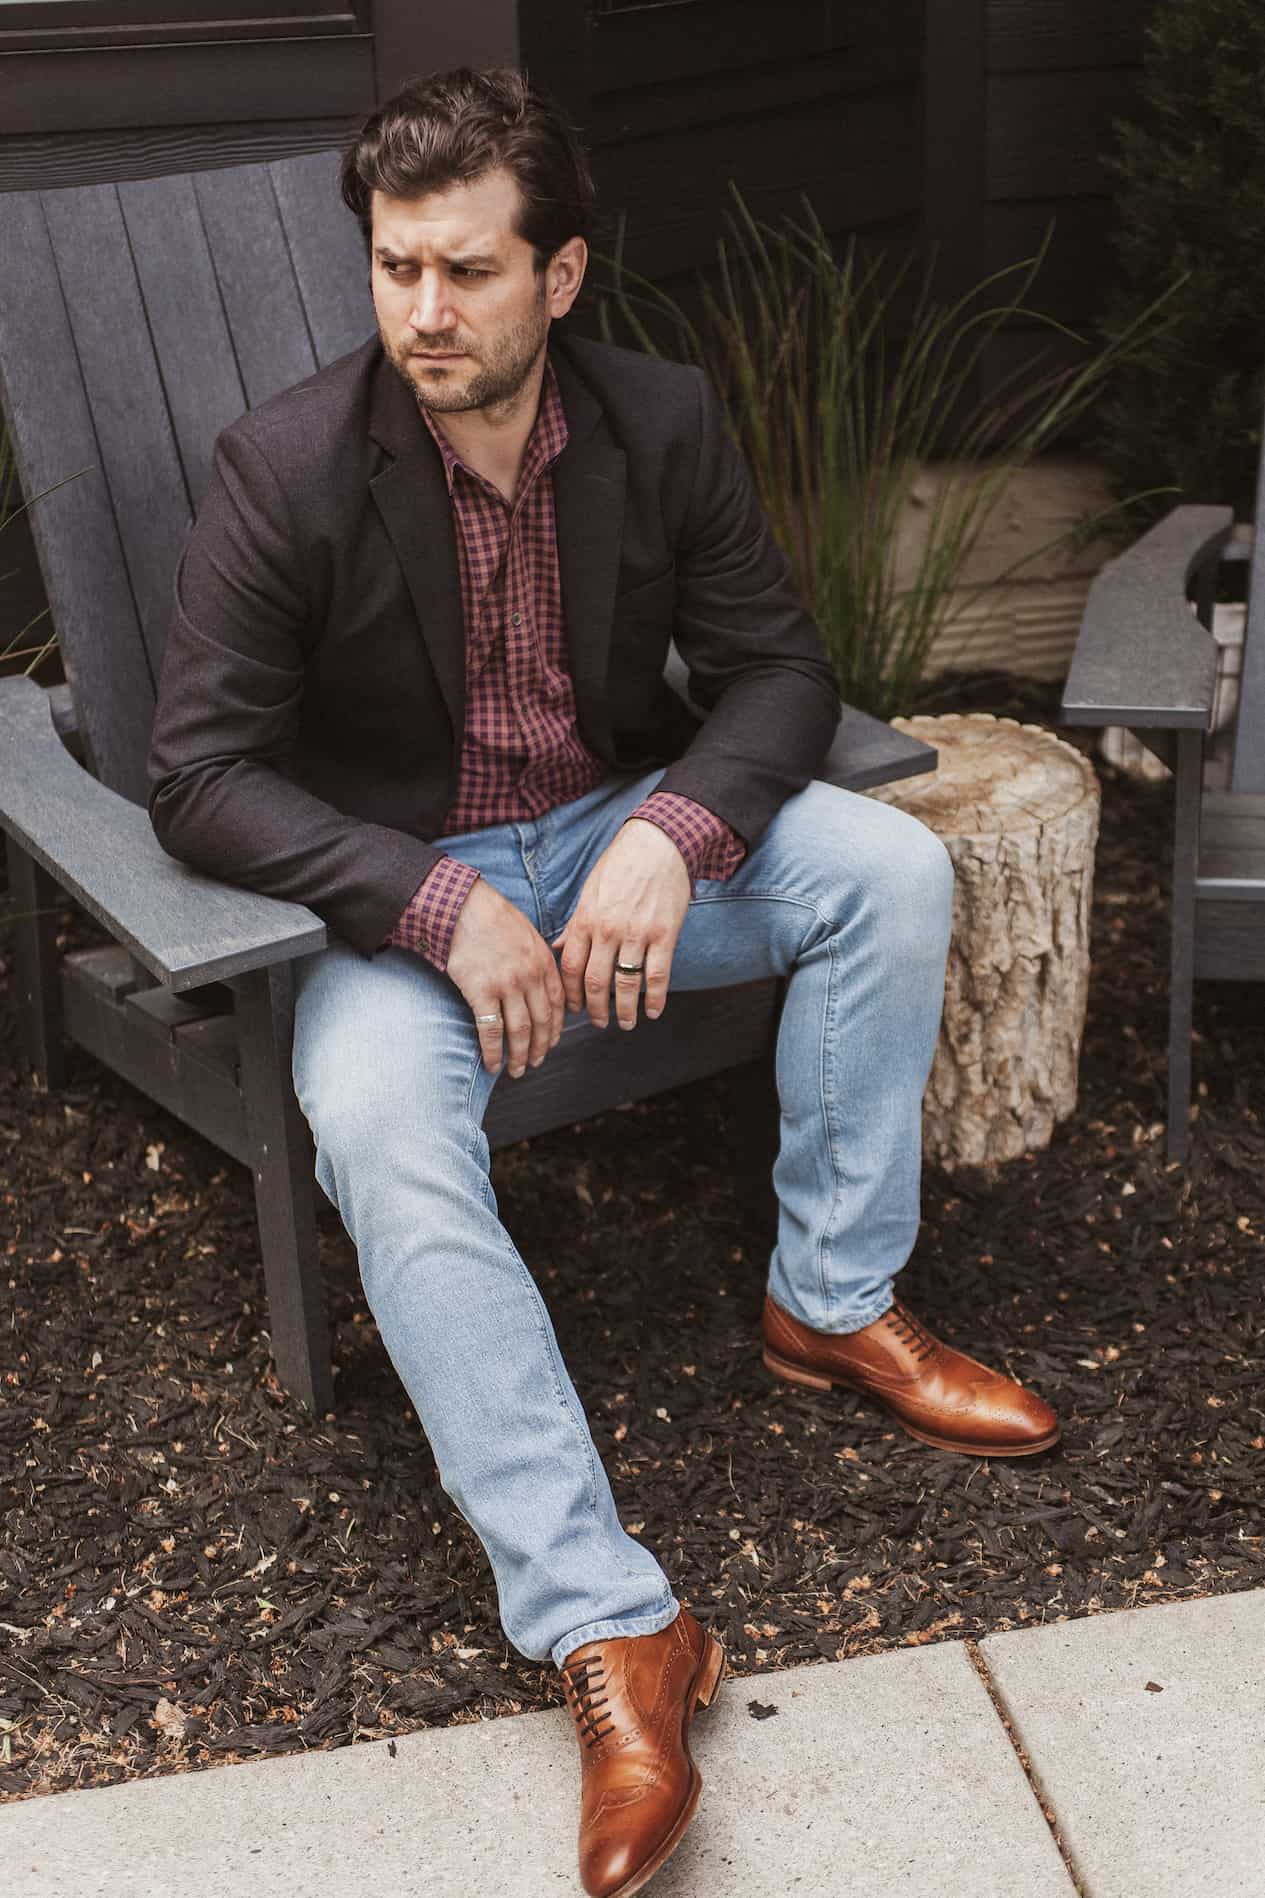 image of a man sitting on a black Adirondack chair wearing a charcoal blazer, red plaid shirt, light blue jeans, and brown shoes